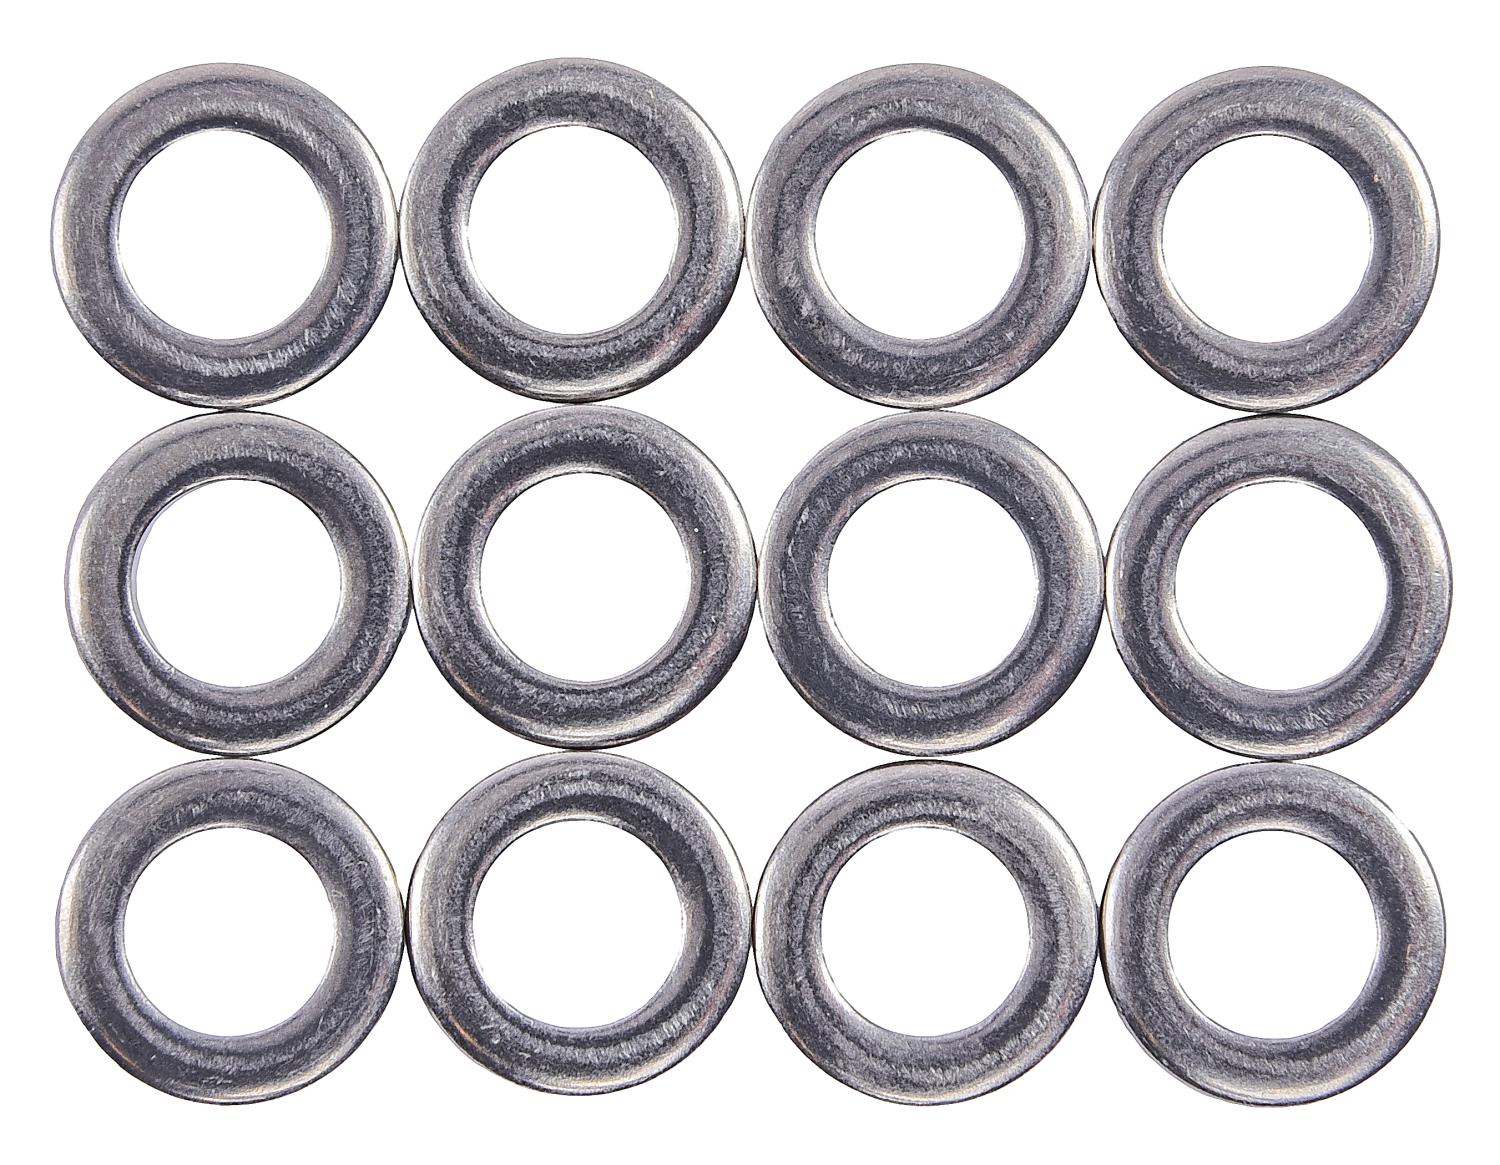 Exhaust Manifold Washer Set for 1957-1978 Small Block Chevrolet Engines